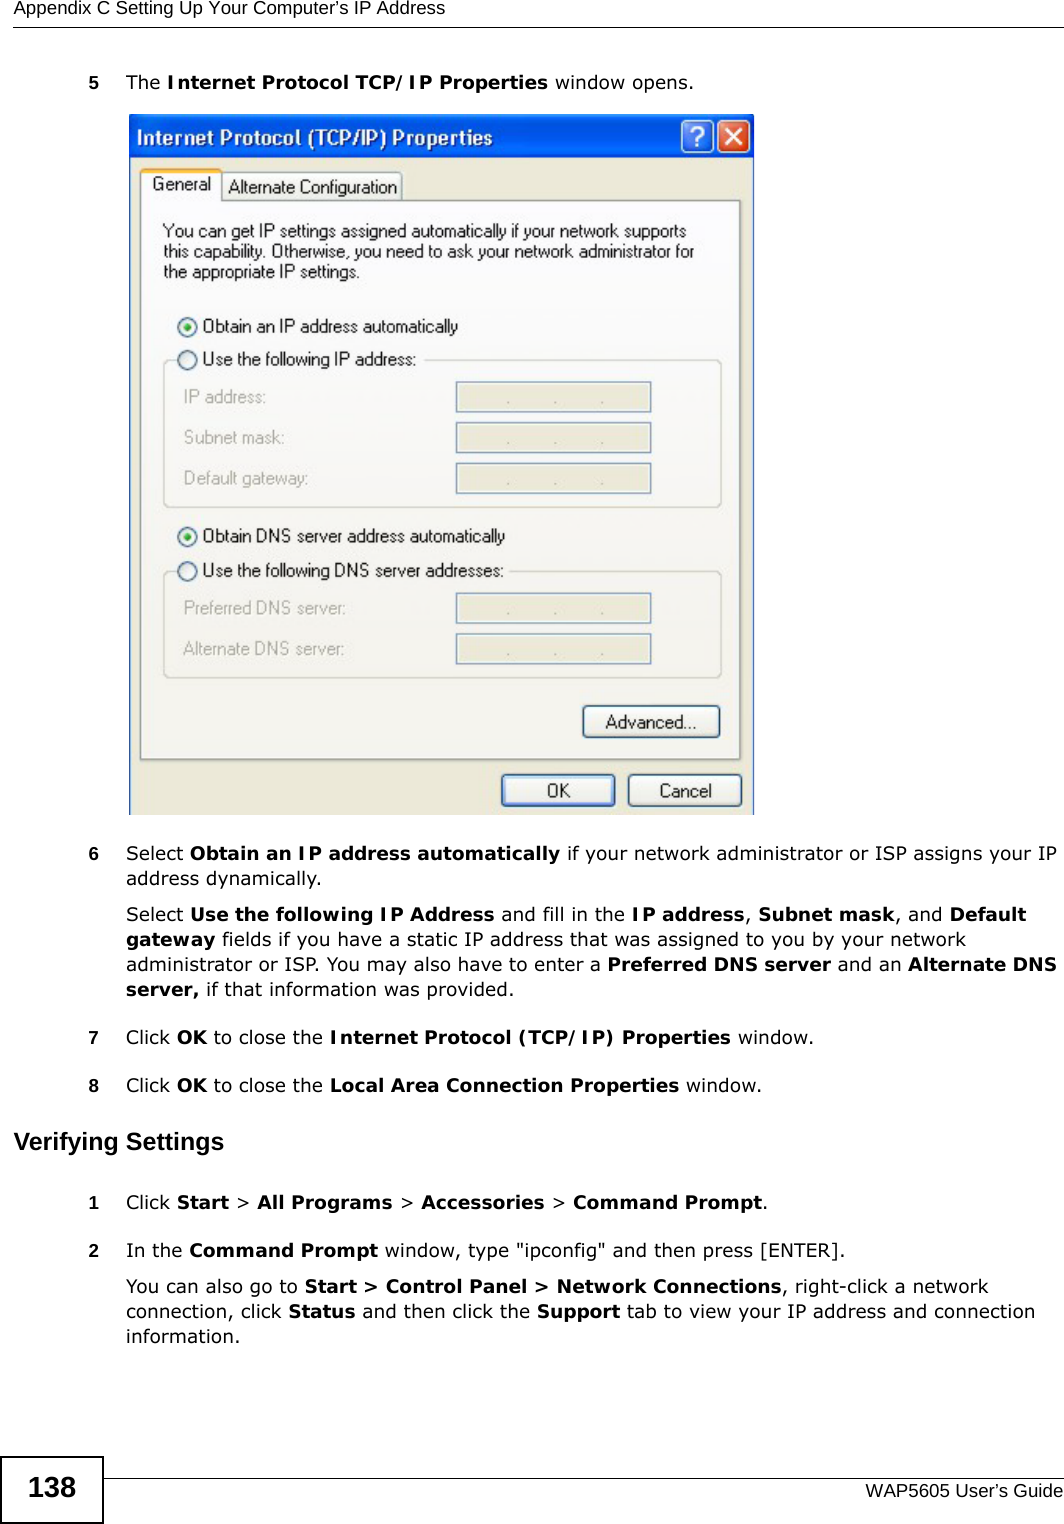 Appendix C Setting Up Your Computer’s IP AddressWAP5605 User’s Guide1385The Internet Protocol TCP/IP Properties window opens.6Select Obtain an IP address automatically if your network administrator or ISP assigns your IP address dynamically.Select Use the following IP Address and fill in the IP address, Subnet mask, and Default gateway fields if you have a static IP address that was assigned to you by your network administrator or ISP. You may also have to enter a Preferred DNS server and an Alternate DNS server, if that information was provided.7Click OK to close the Internet Protocol (TCP/IP) Properties window.8Click OK to close the Local Area Connection Properties window.Verifying Settings1Click Start &gt; All Programs &gt; Accessories &gt; Command Prompt.2In the Command Prompt window, type &quot;ipconfig&quot; and then press [ENTER]. You can also go to Start &gt; Control Panel &gt; Network Connections, right-click a network connection, click Status and then click the Support tab to view your IP address and connection information.